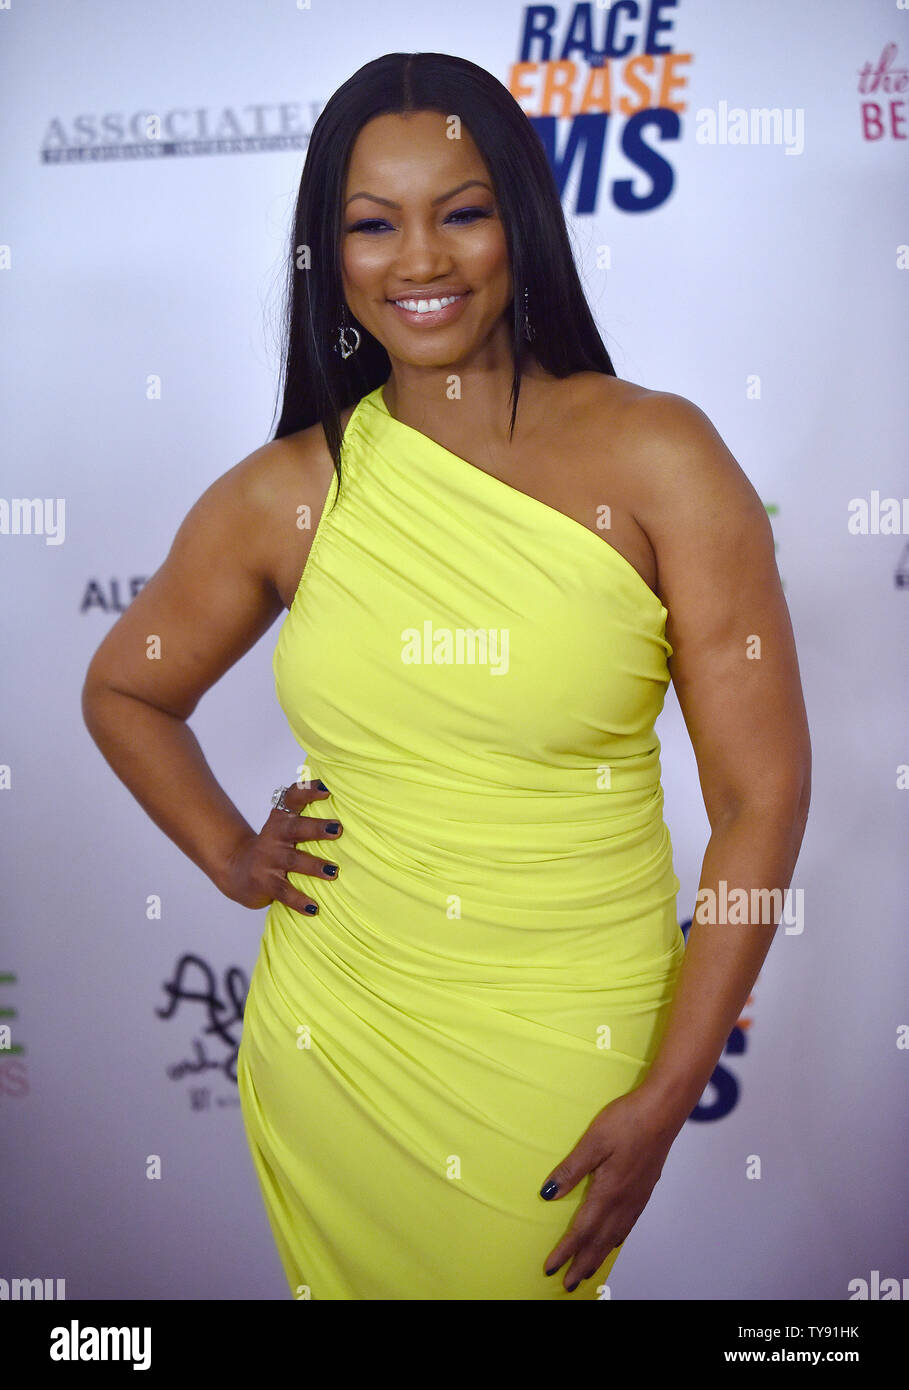 Garcelle Beauvais arrives on the orange carpet for the 26th Annual Race to Erase MS Gala at the Beverly Hilton hotel in Beverly Hills, California on May 10, 2019. Photo by Chris Chew/UPI Stock Photo